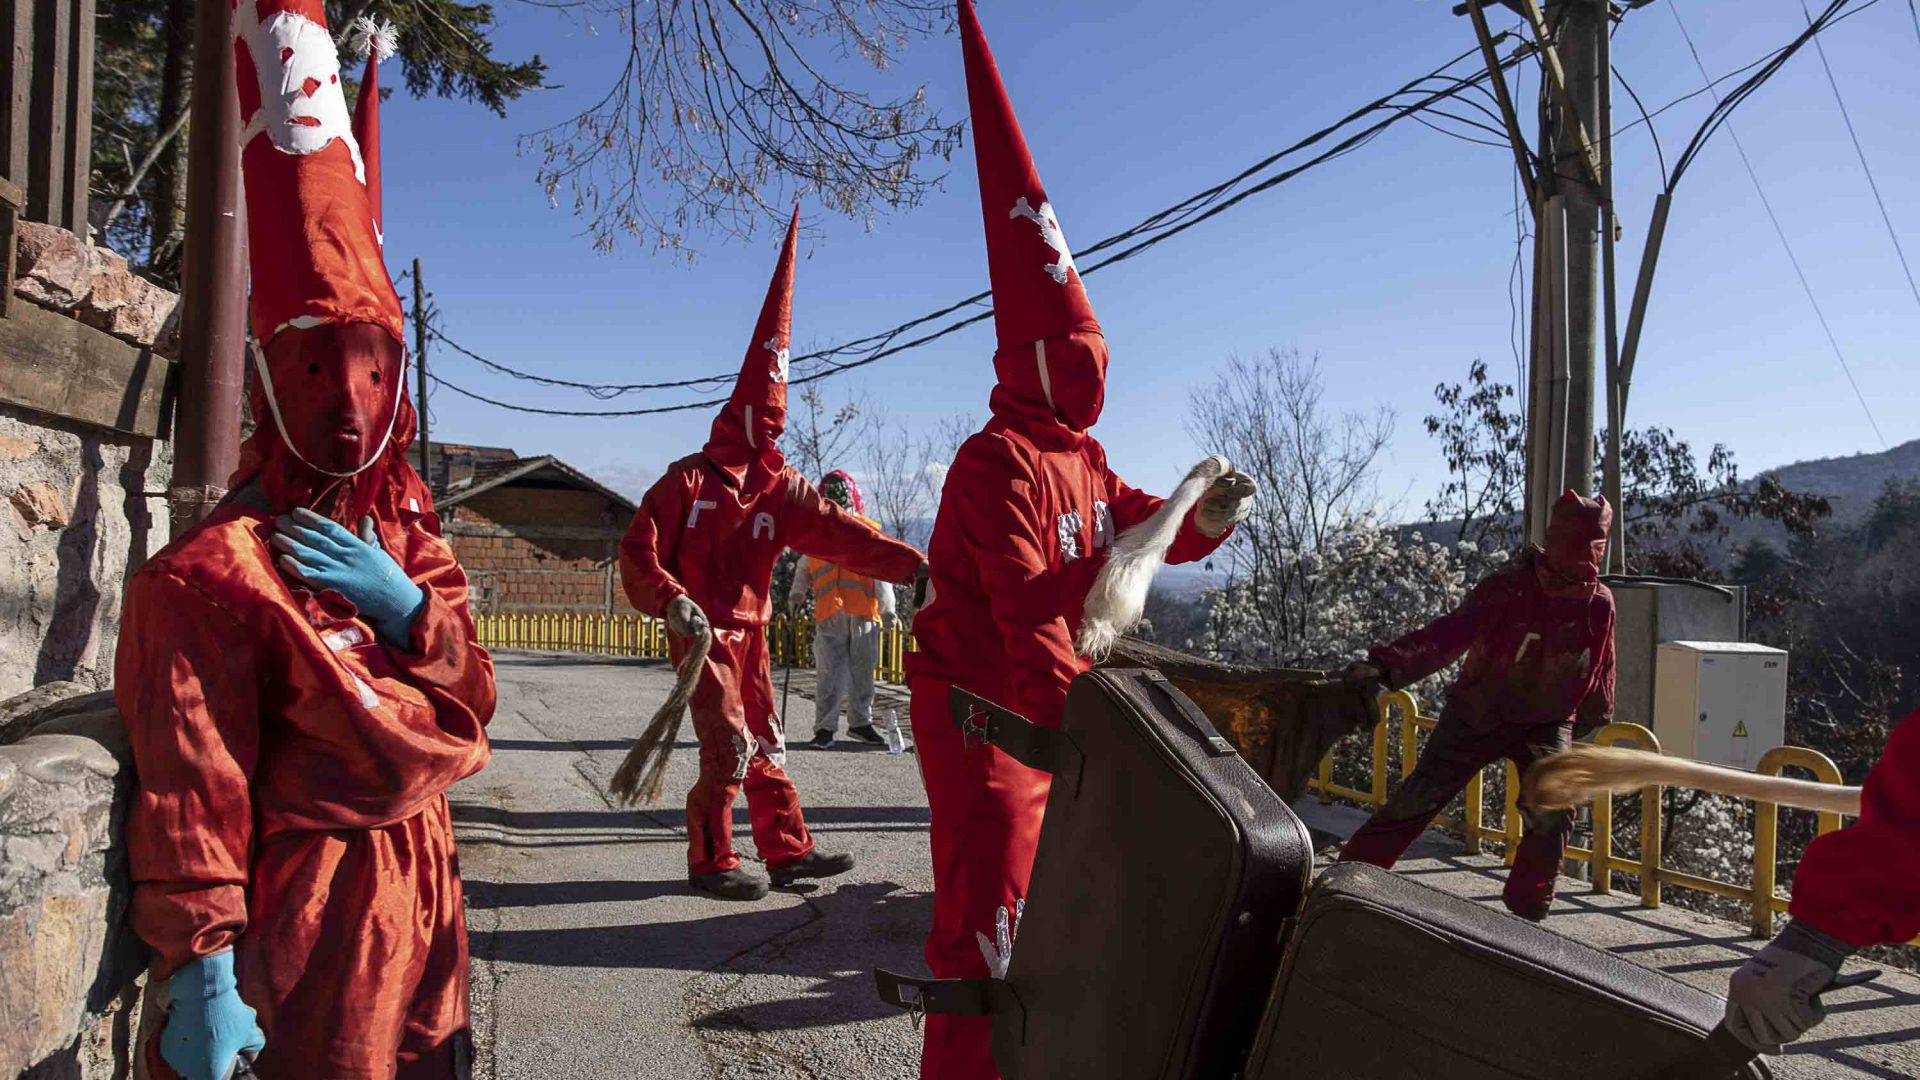 People in red costumes walk through the streets.